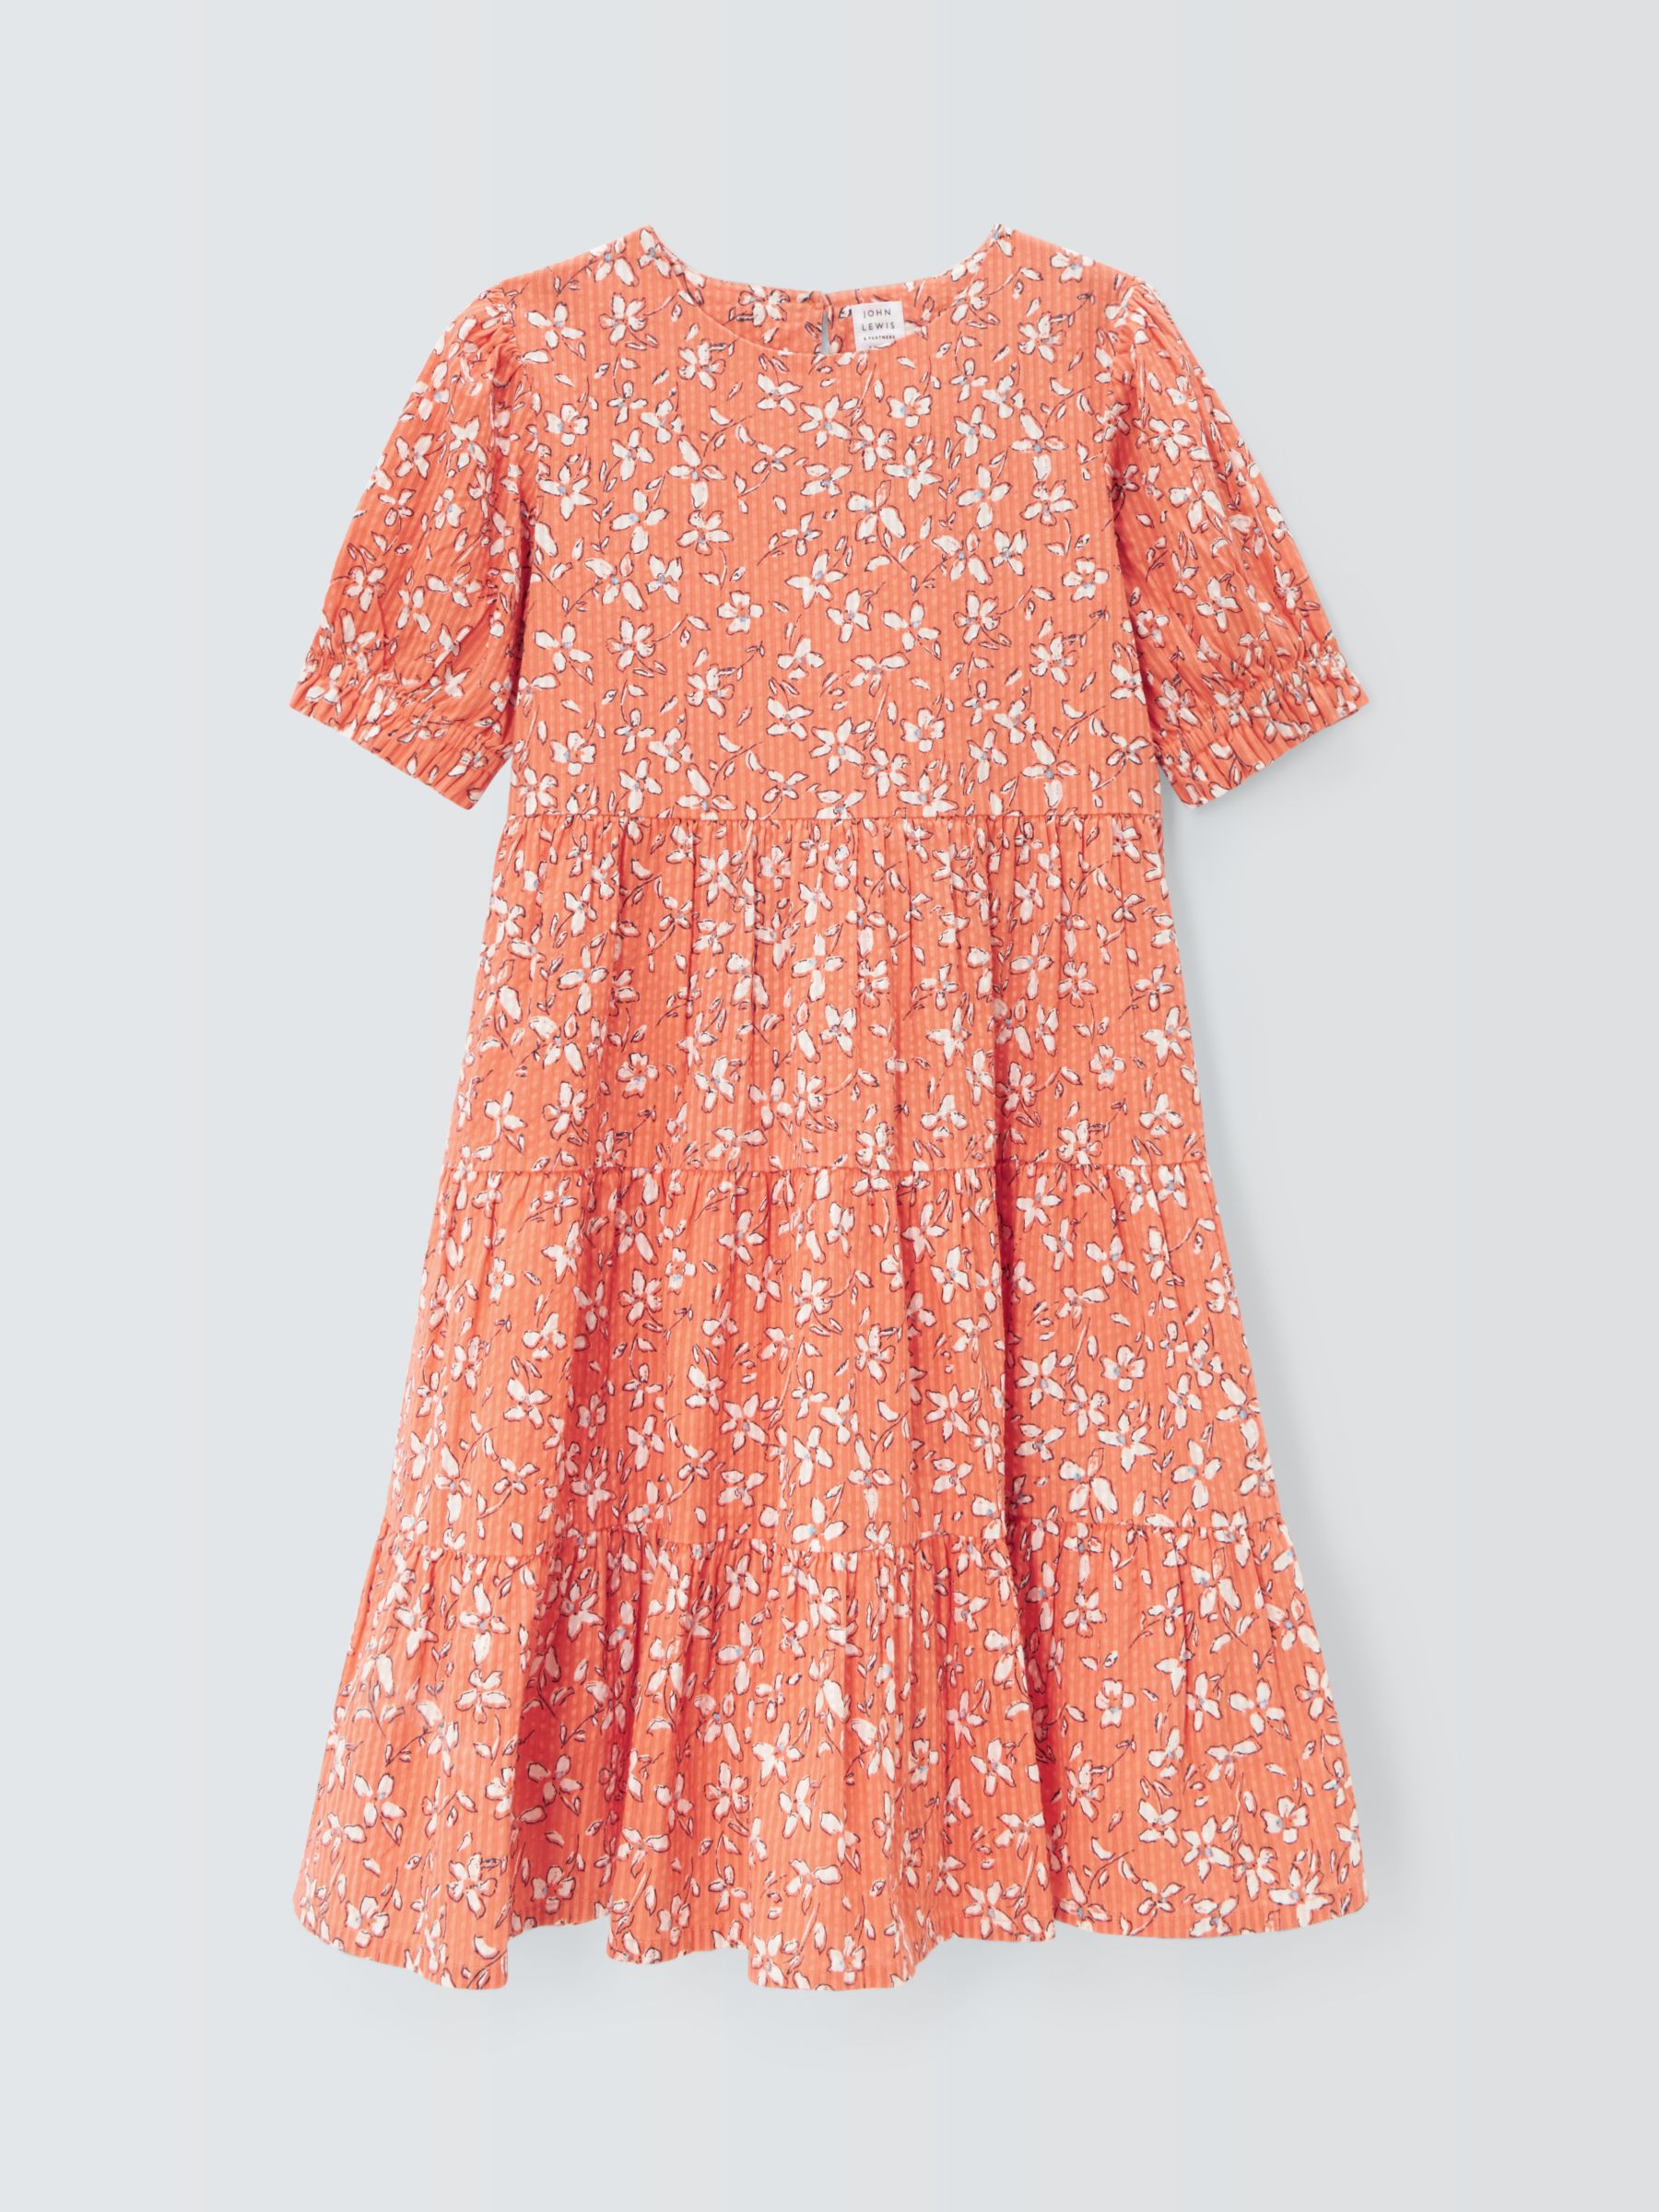 John Lewis Kids' Ditsy Floral Tiered Dress, Mauve, 2 years